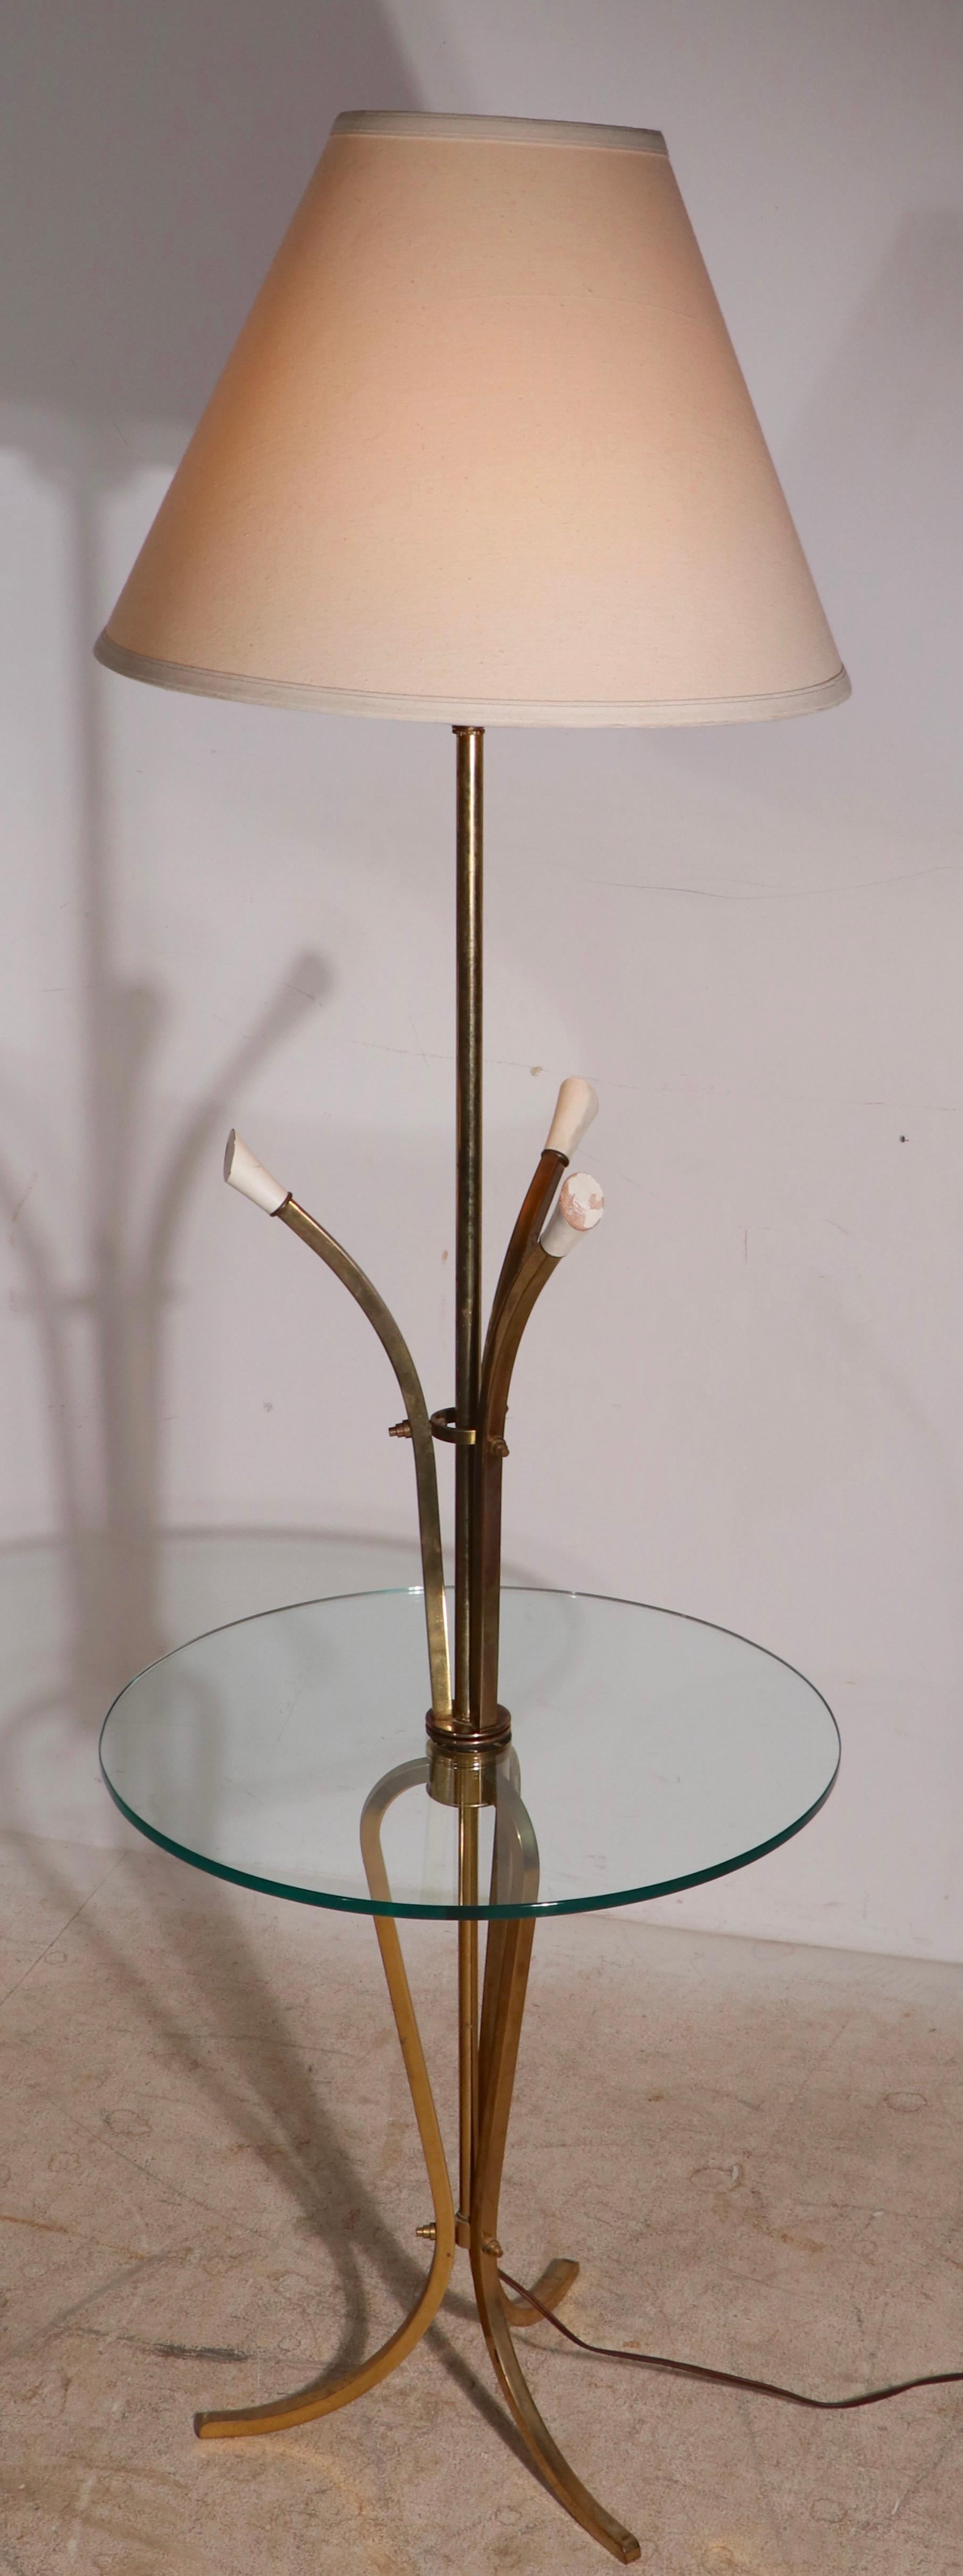 Voguish floor lamp with circular plate glass table attached. The vertical elements are of squared brass, the tops terminate in stylized wood flowers, in original white paint finish.
Quintessential Hollywood Regency floor lamp, in very fine,